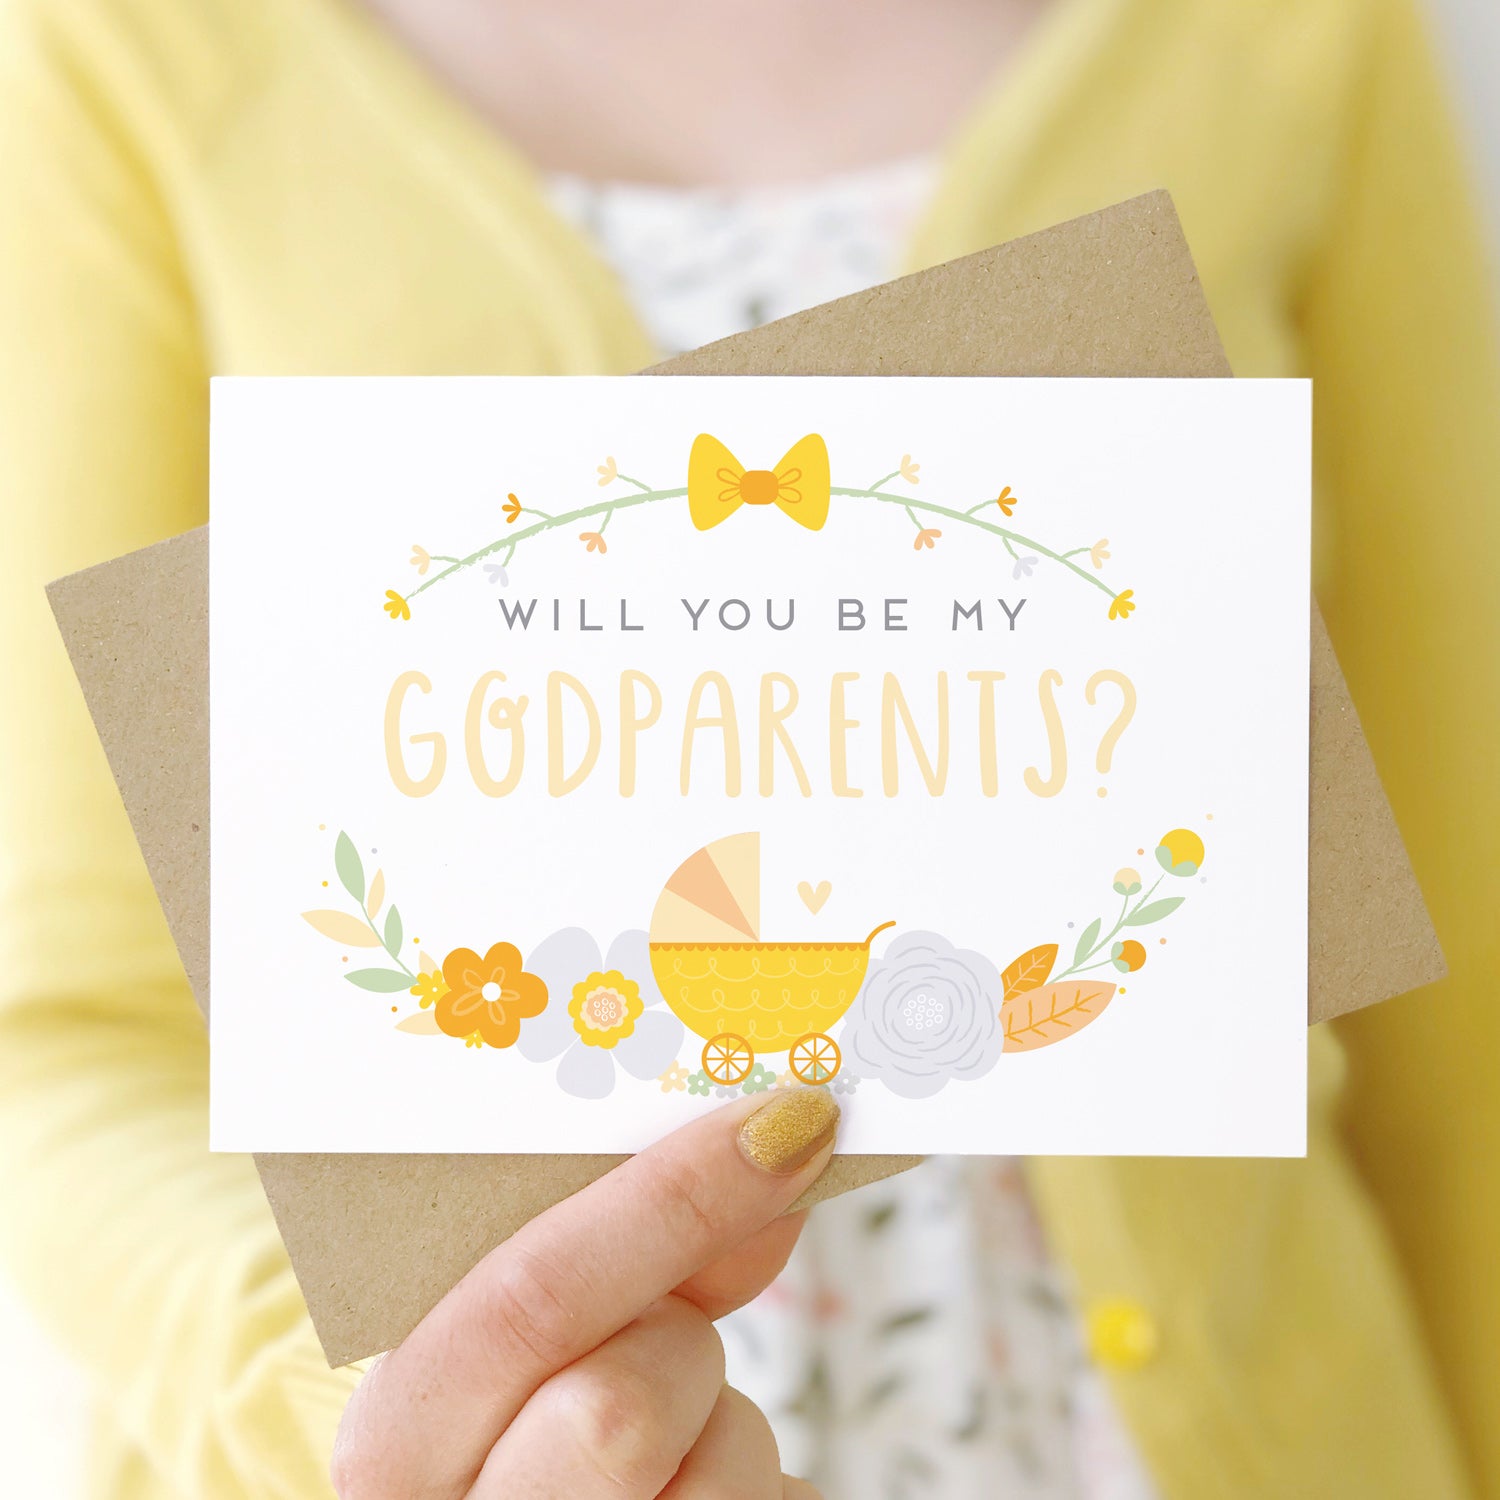 A will you be my godparents card being held in front of a white dress and yellow cardigan. The design features a pram, simple florals and the all important question. This is the yellow palette.